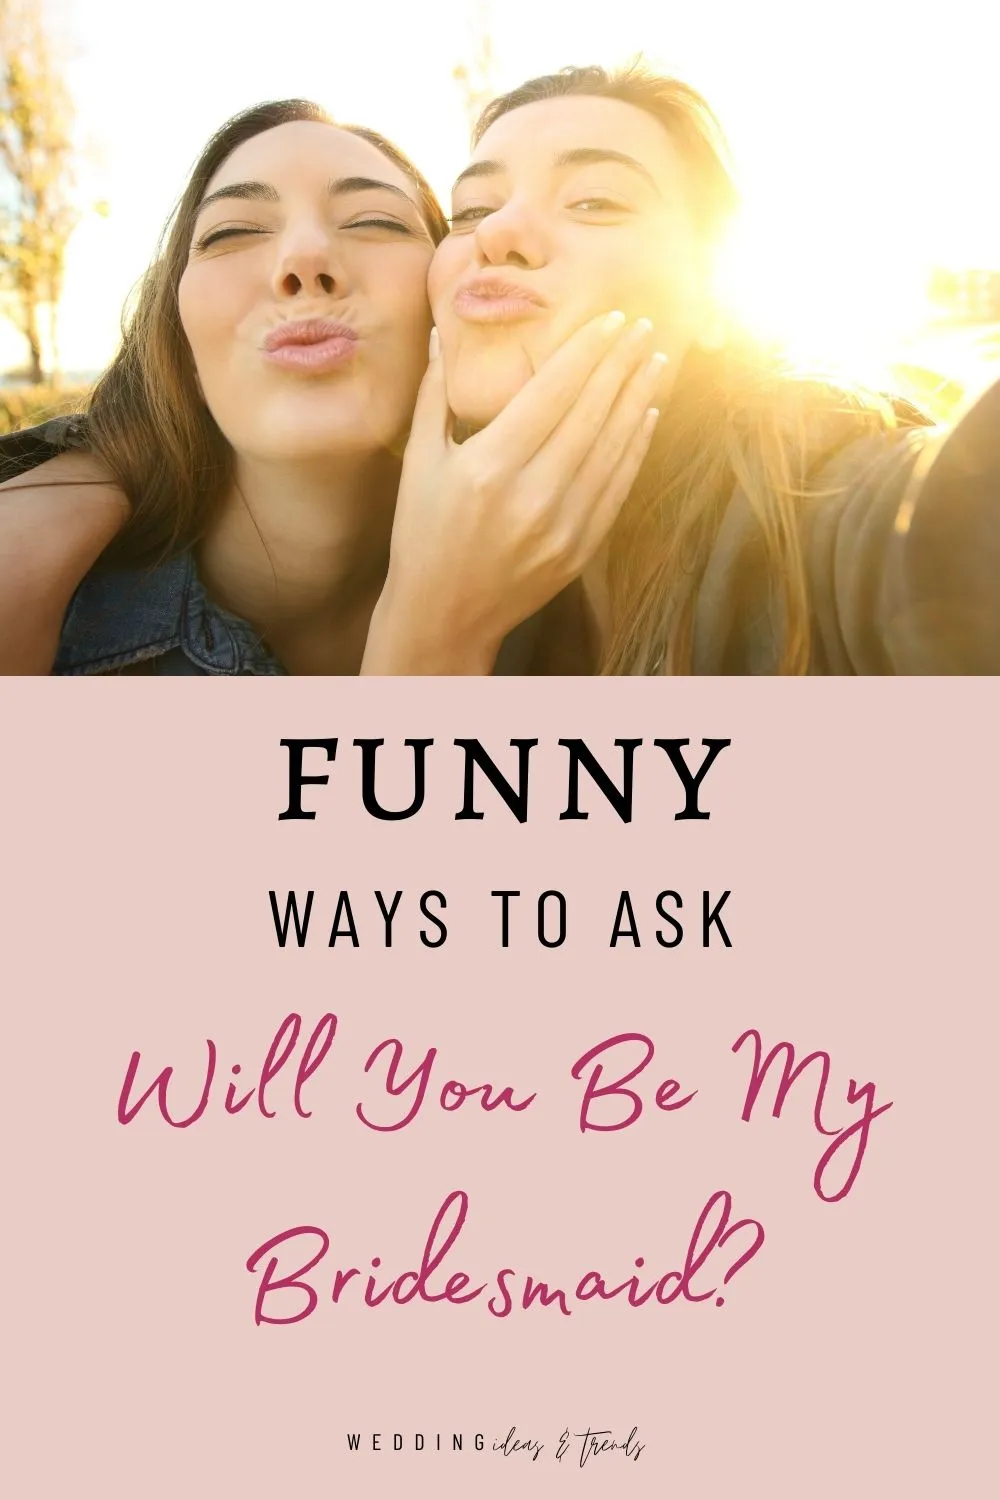 Are you looking for funny or cute ways to ask ‘will you be my bridesmaid? Here is a list of funny ways to ask bridesmaids to be at your wedding. 